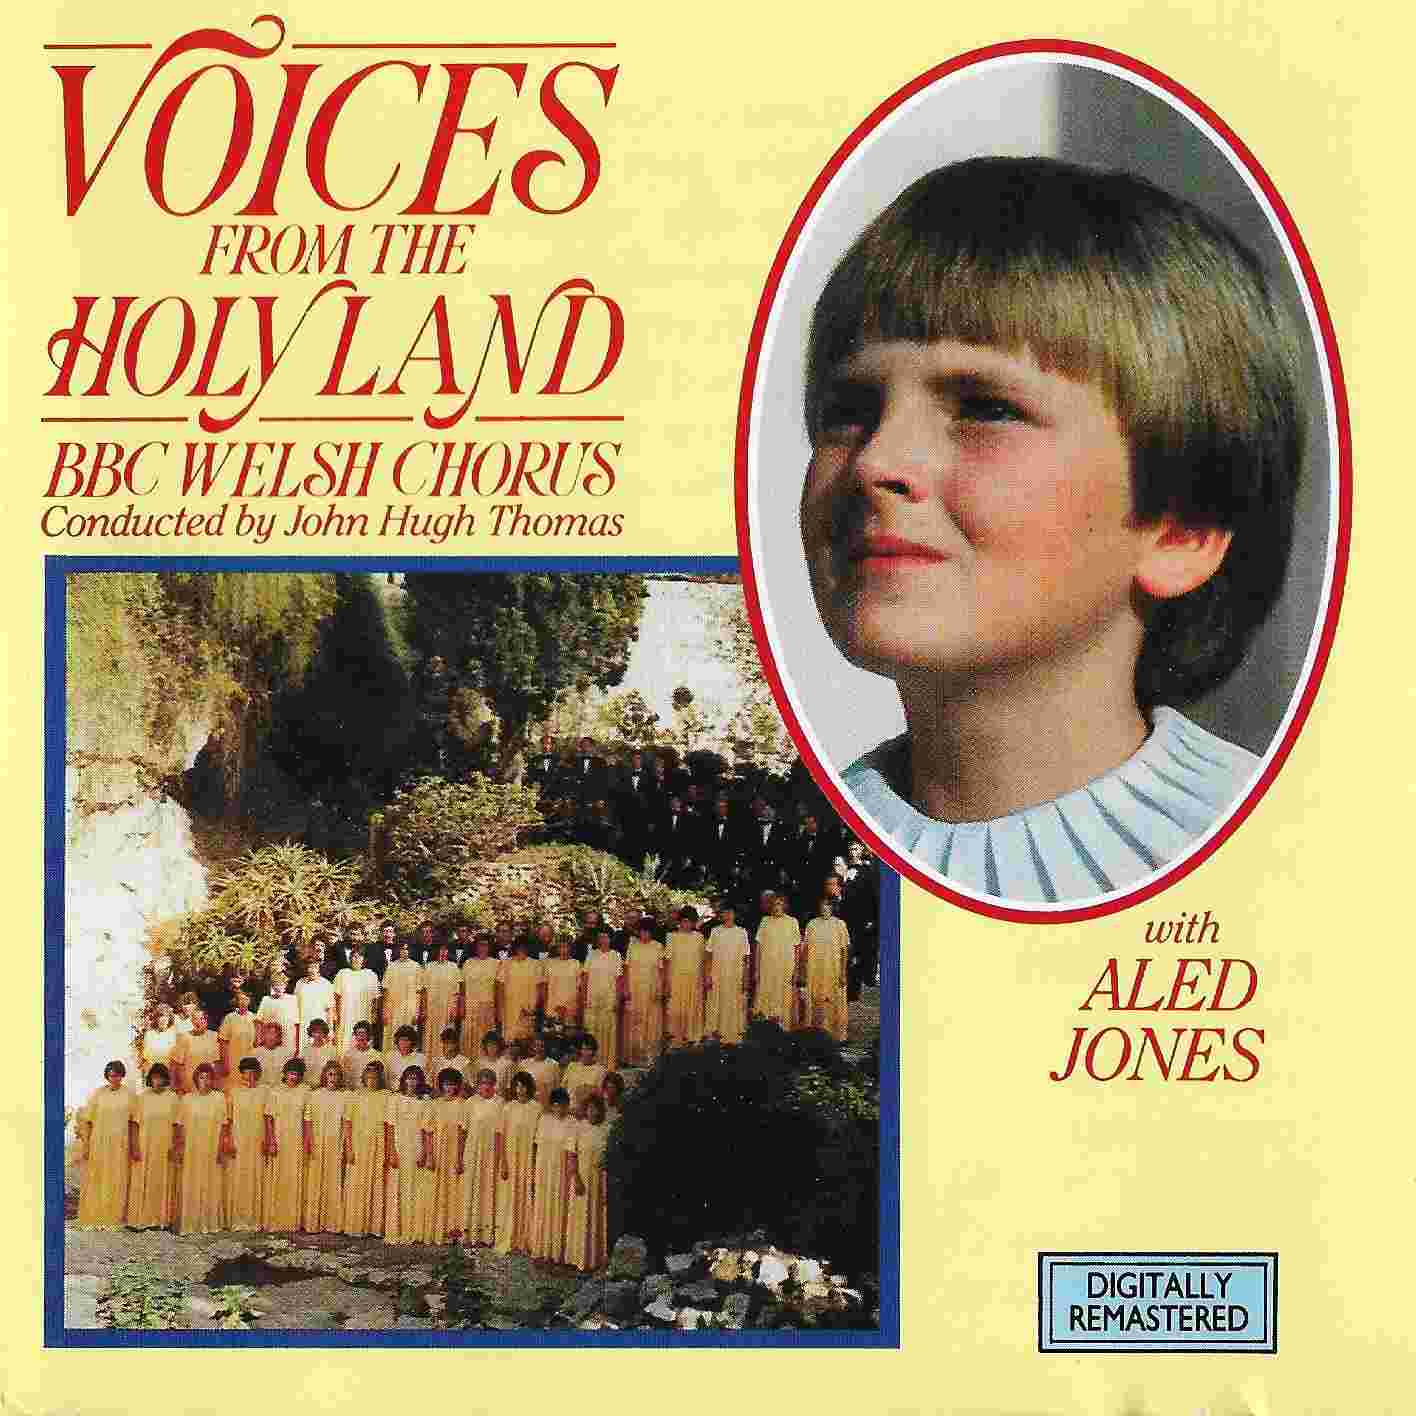 Picture of PWKS 651 Voices from the Holy Land by artist Various from the BBC cds - Records and Tapes library